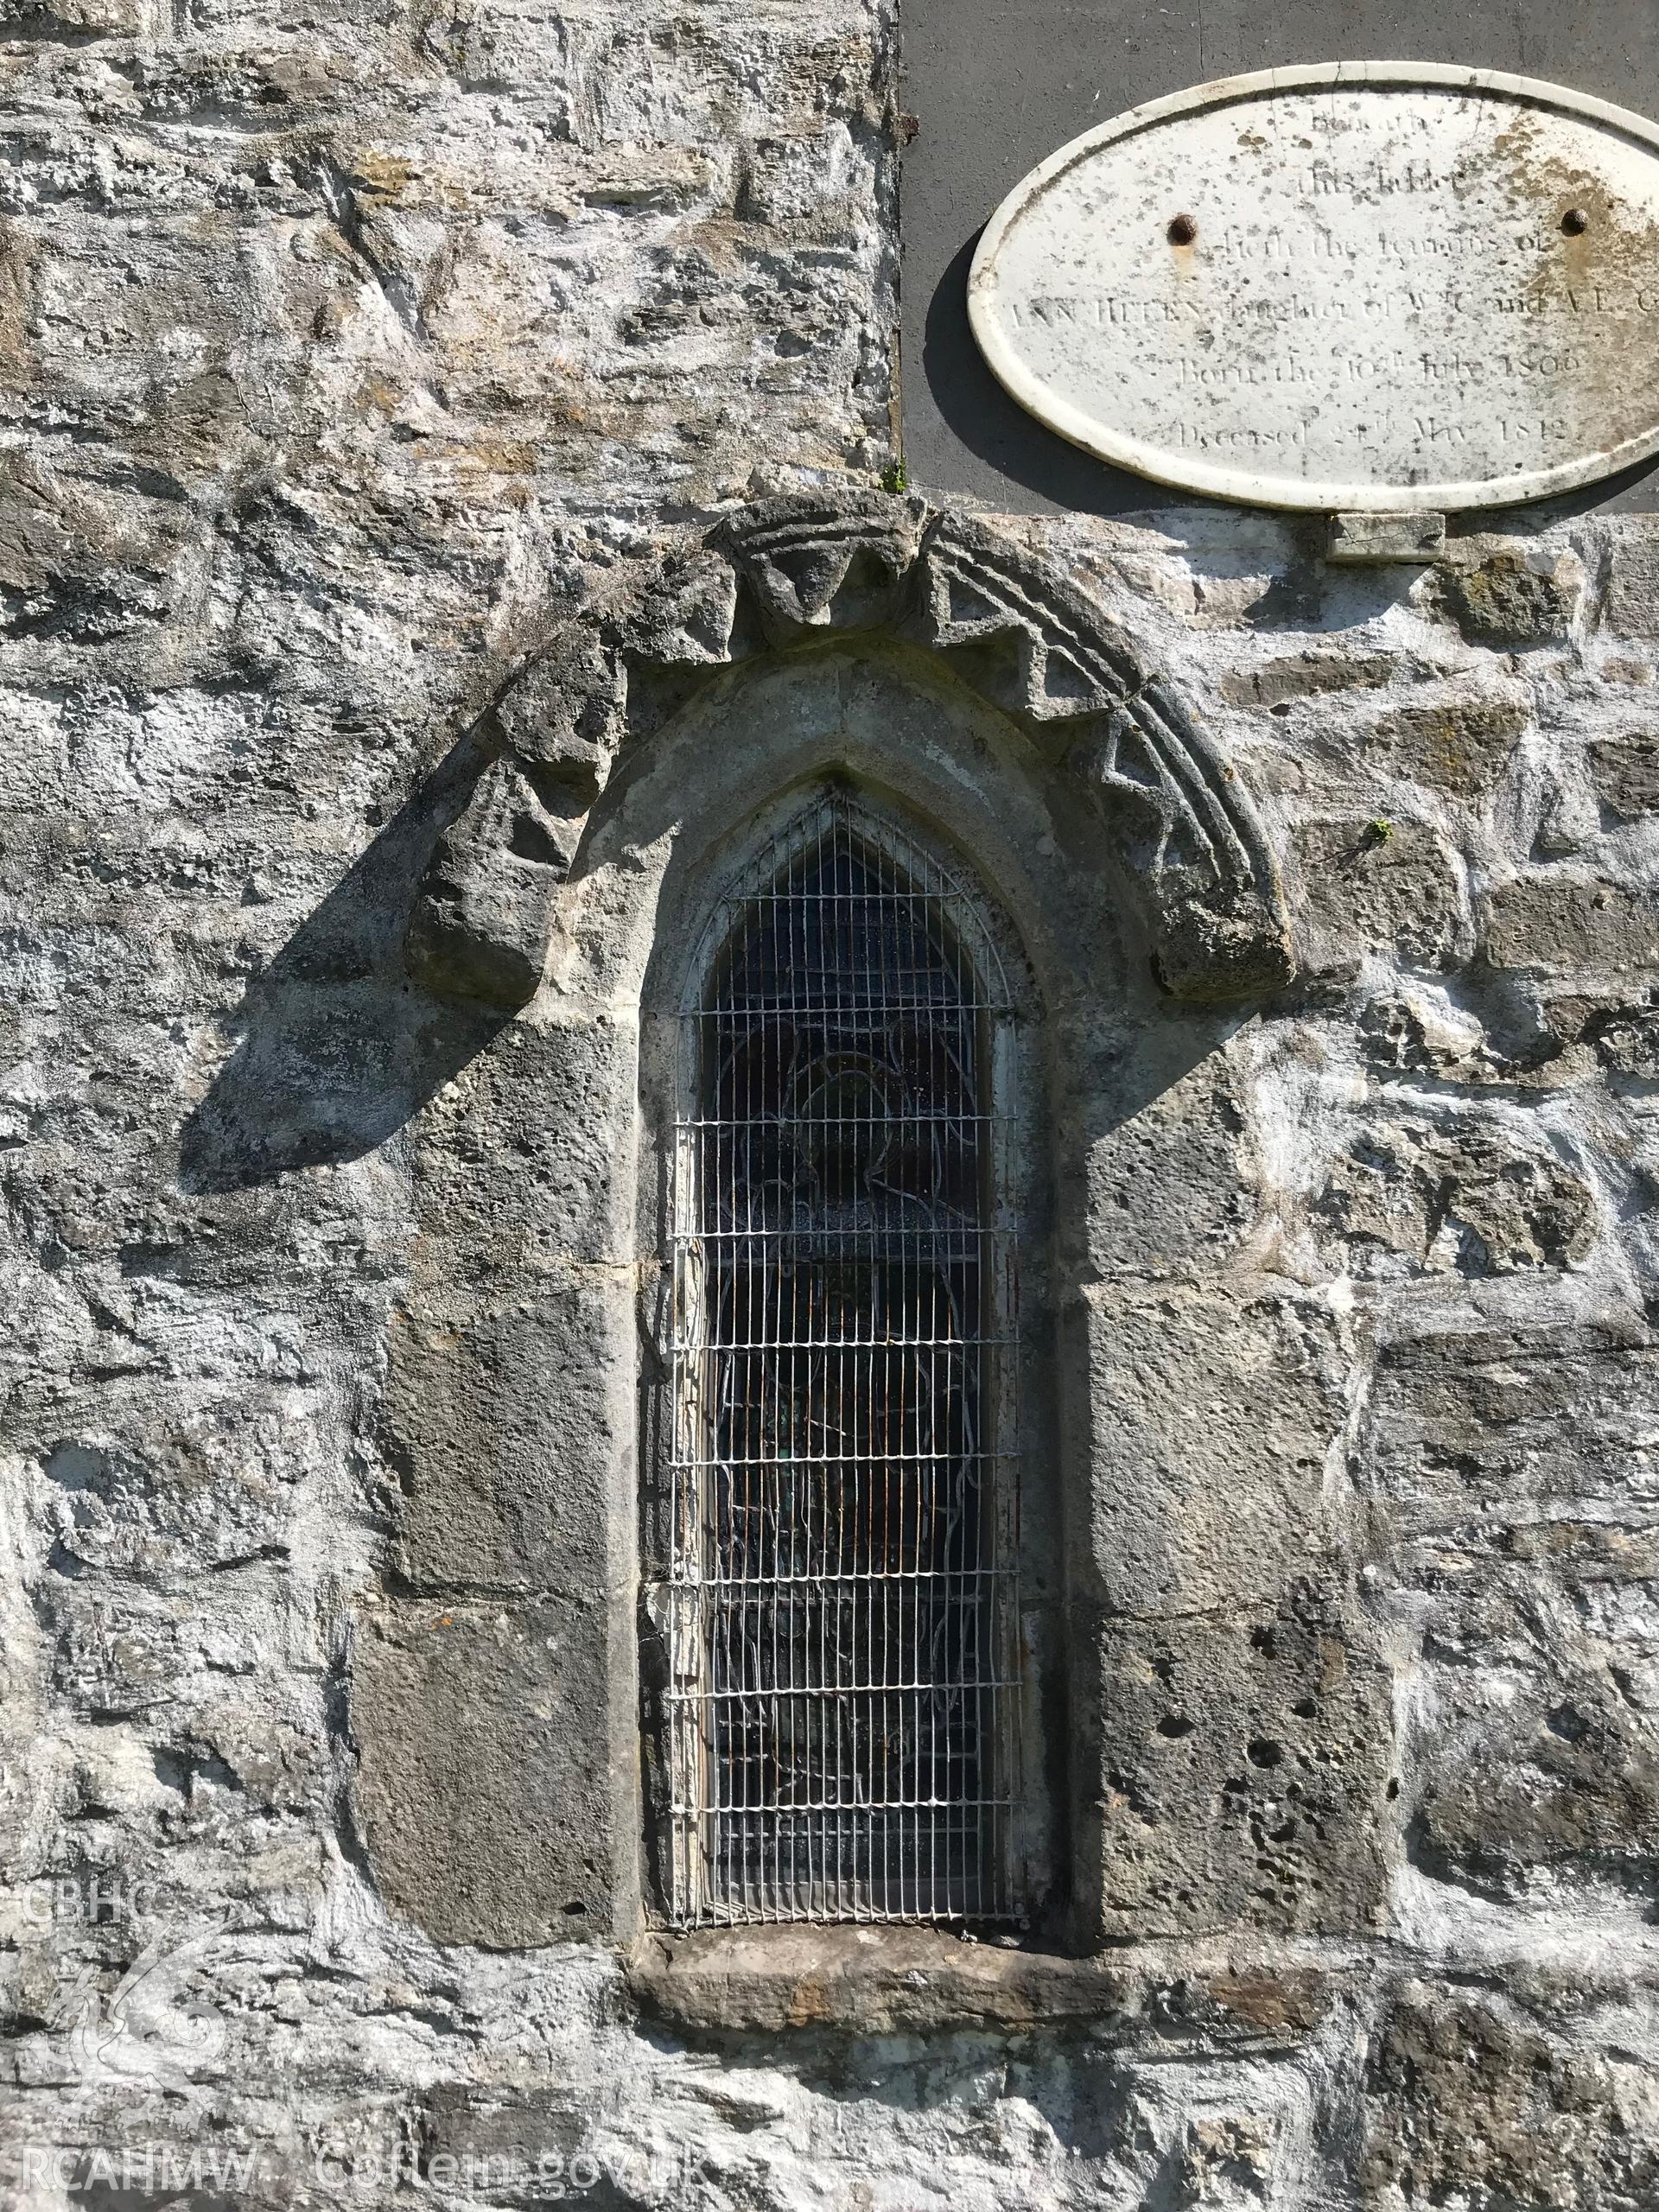 Colour photo showing exterior detail of window at St. Mary's Church, Pennard, taken by Paul R. Davis, 13th May 2018.